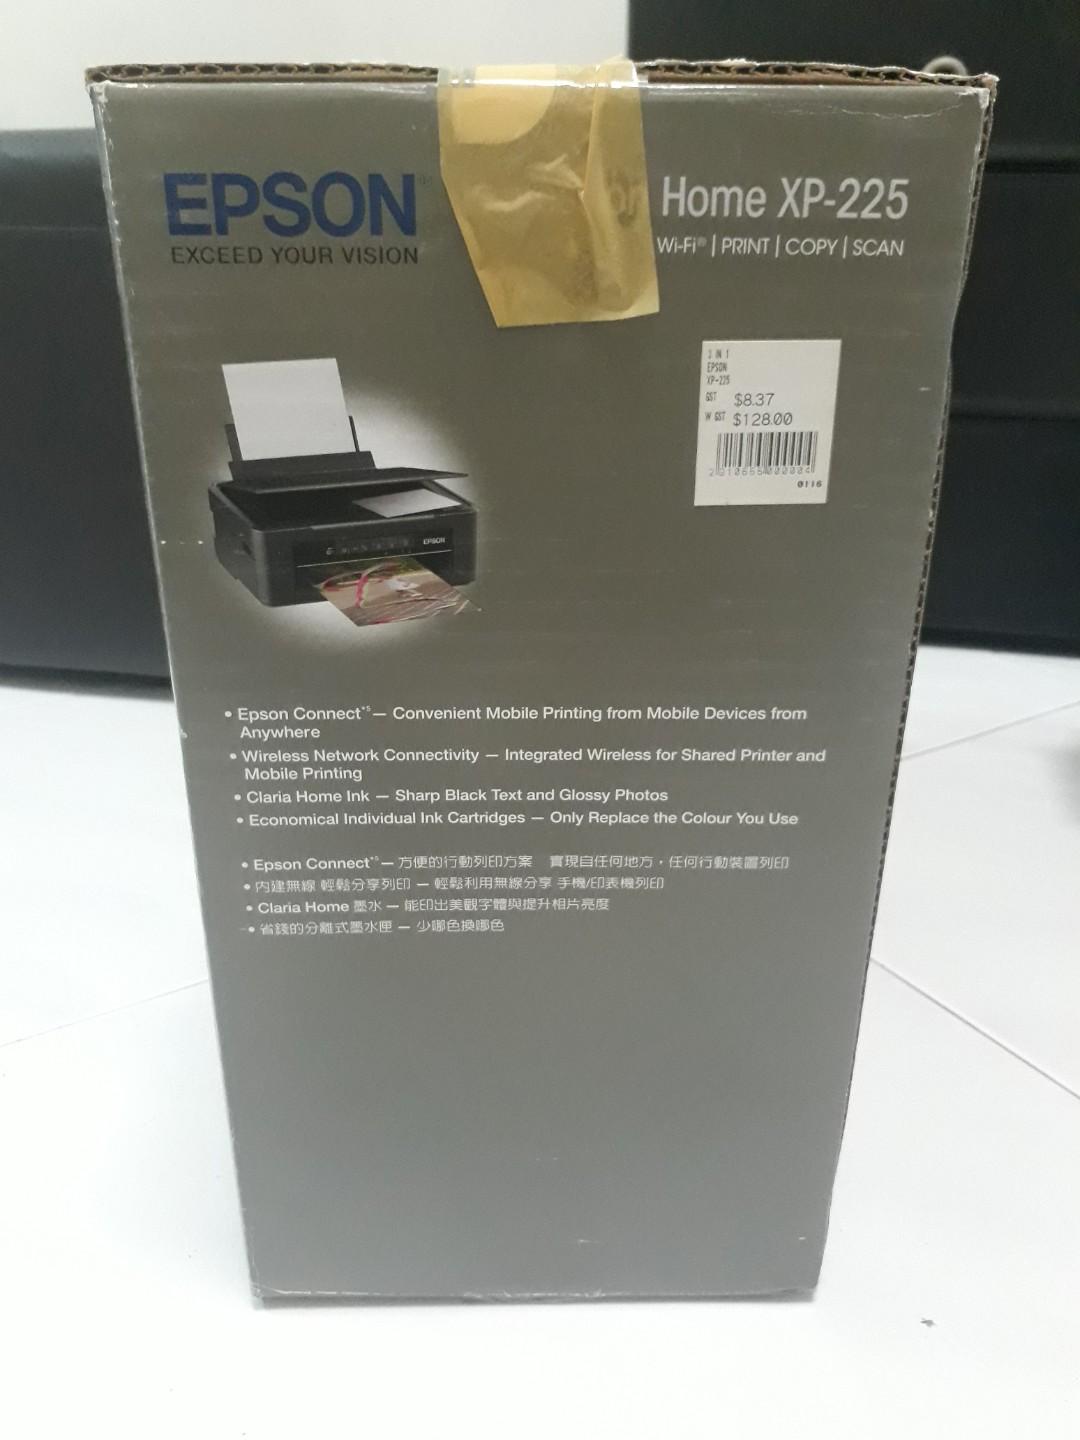 Epson Printer Xp 225 Computers And Tech Printers Scanners And Copiers On Carousell 2385